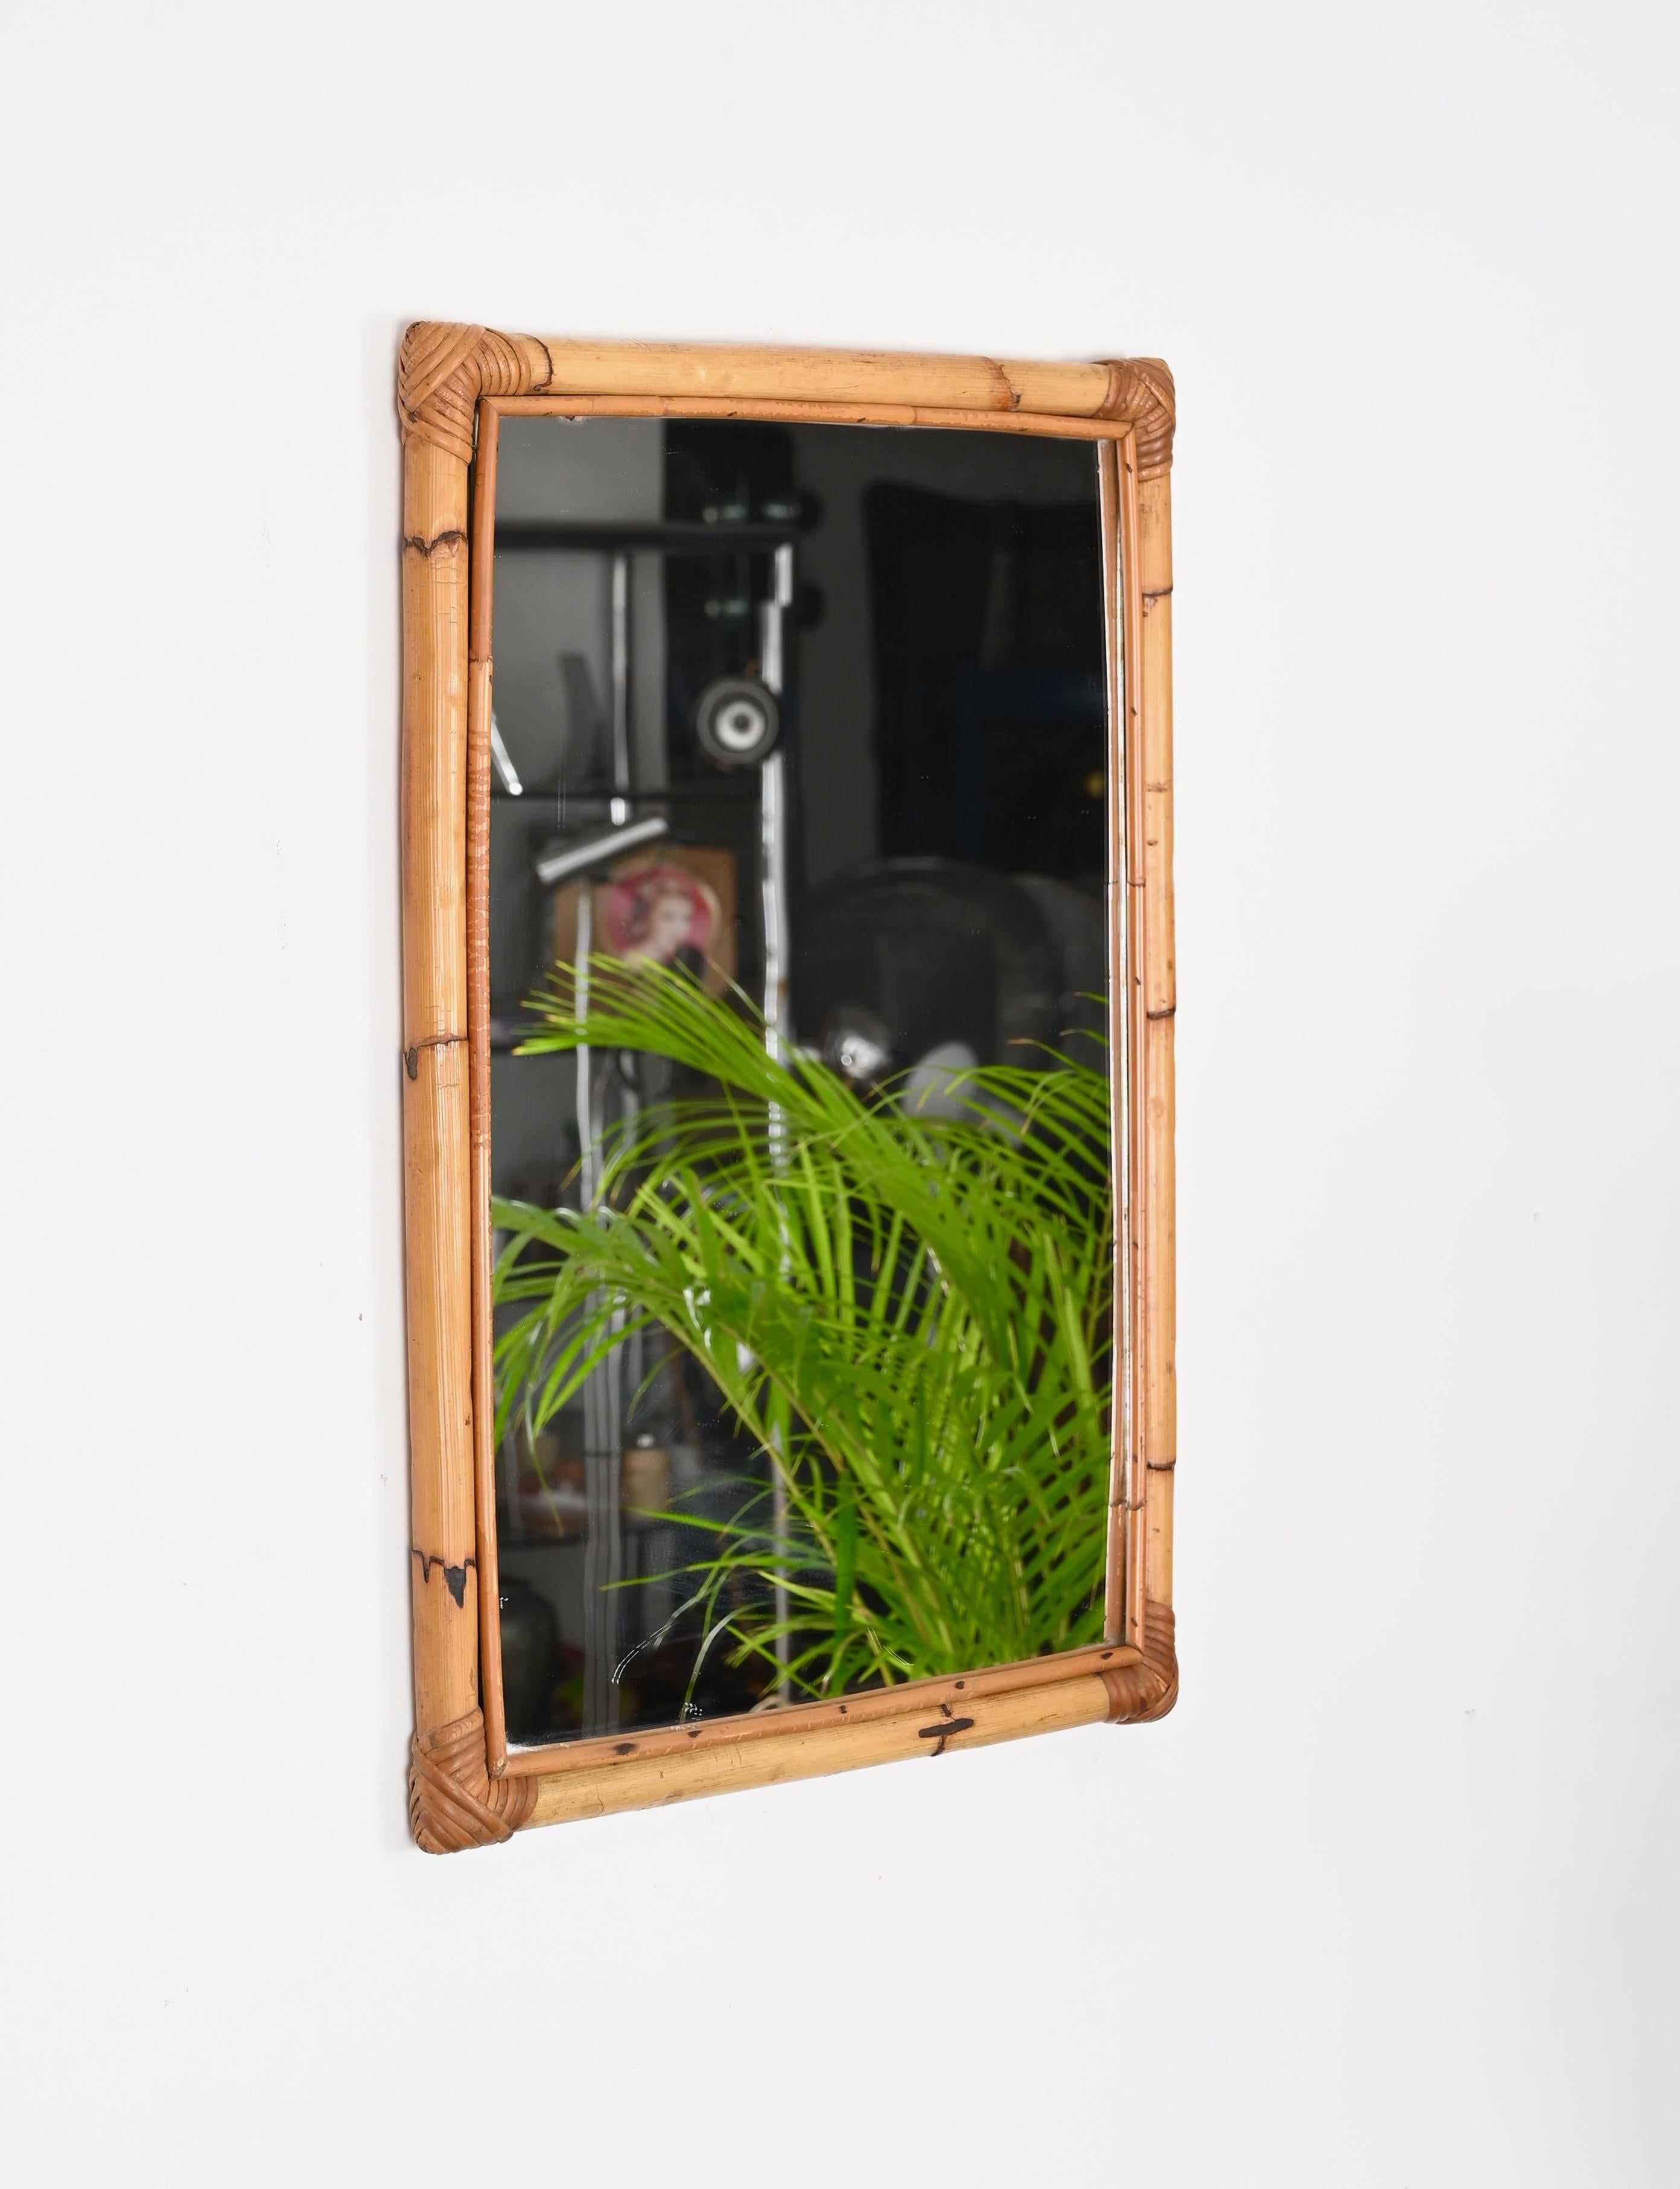 Beautiful Mid-Century French Riviera style rectangular mirror in bamboo and hand-woven rattan wicker. This gorgeous mirror was produced in Italy during the 1970s.

This mirror  has a double frame in bamboo with beautiful corners enriched in